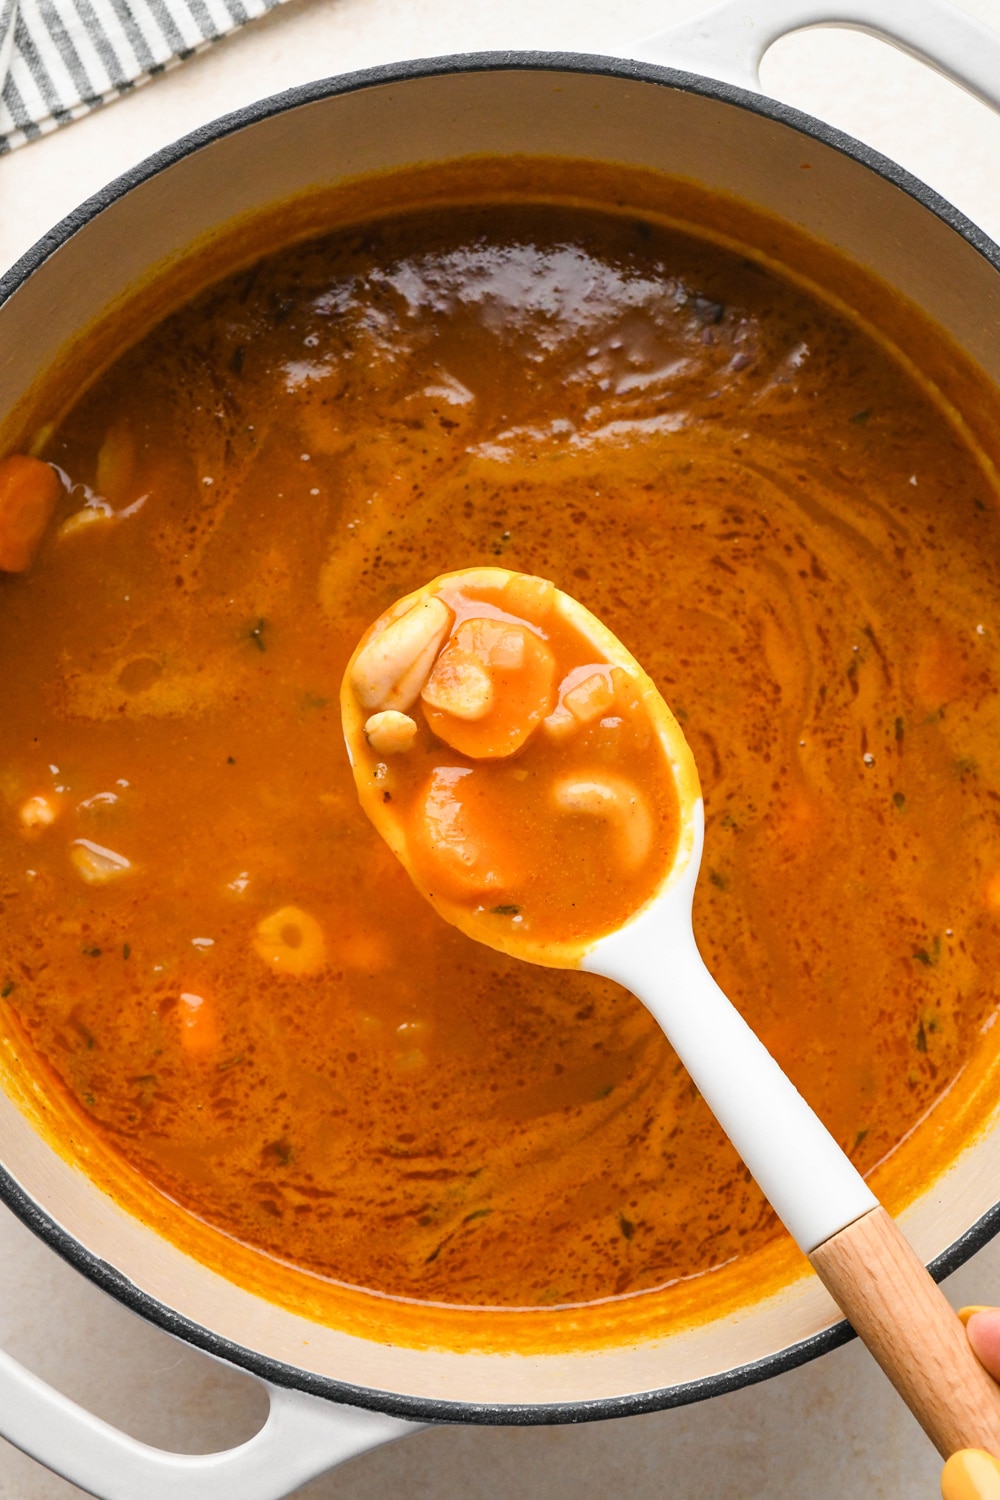 How to make Dairy Free Pumpkin Carrot Soup: A spoon lifting out some of the cashews and carrots from the soup after simmering to show the texture of the plump cashews.